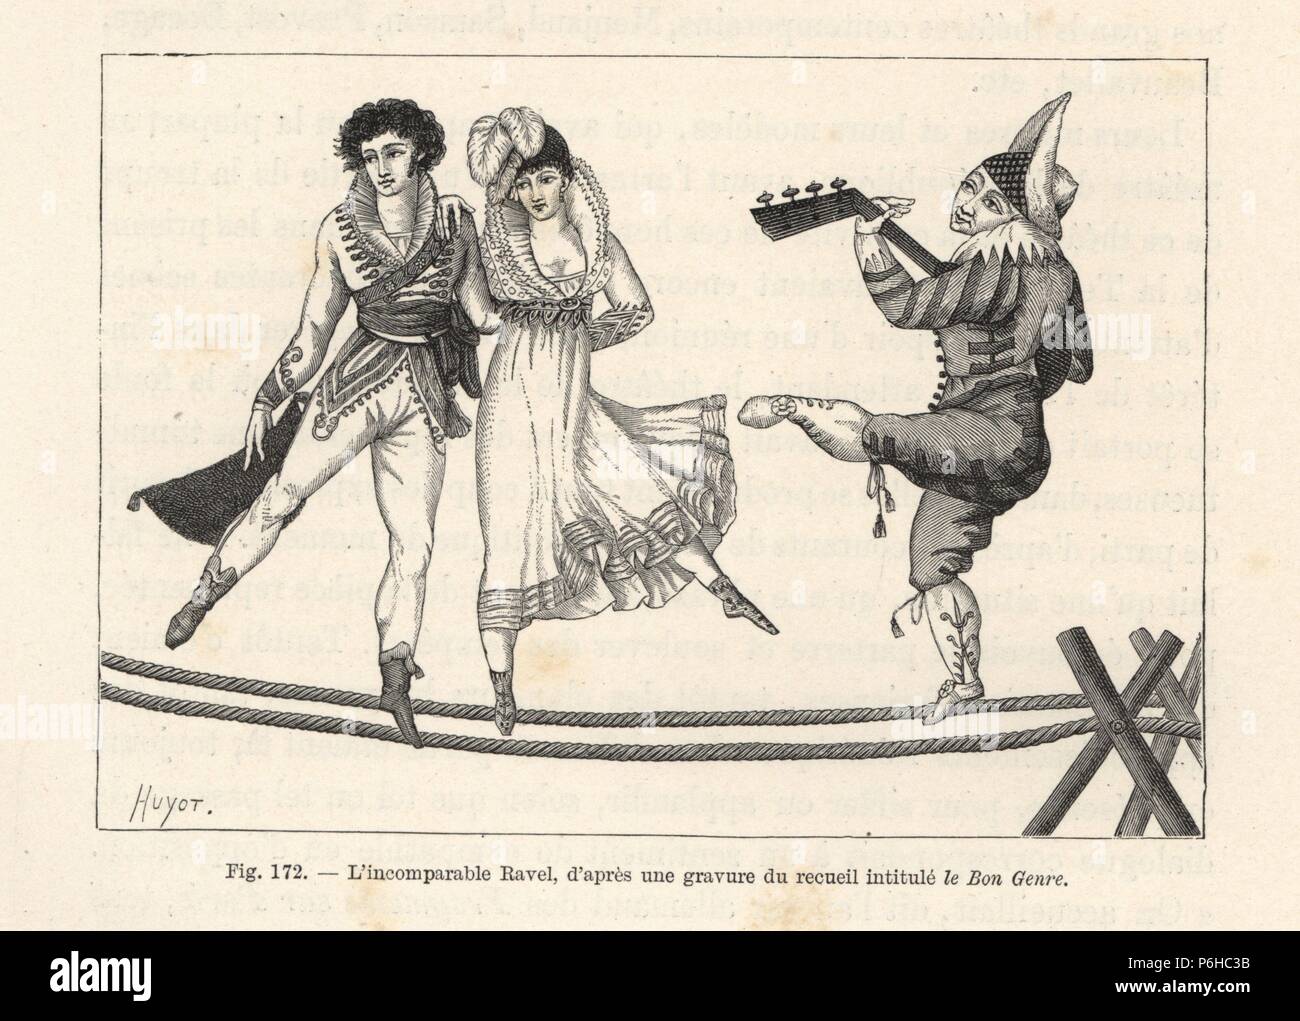 The incomparable Ravel, a guitar-playing French tightrope artist from the early 19th century, with two dancers on thick ropes. Woodcut by Huyot from Paul Lacroix's 'Directoire, Consulat et Empire,' Paris, 1884. Stock Photo